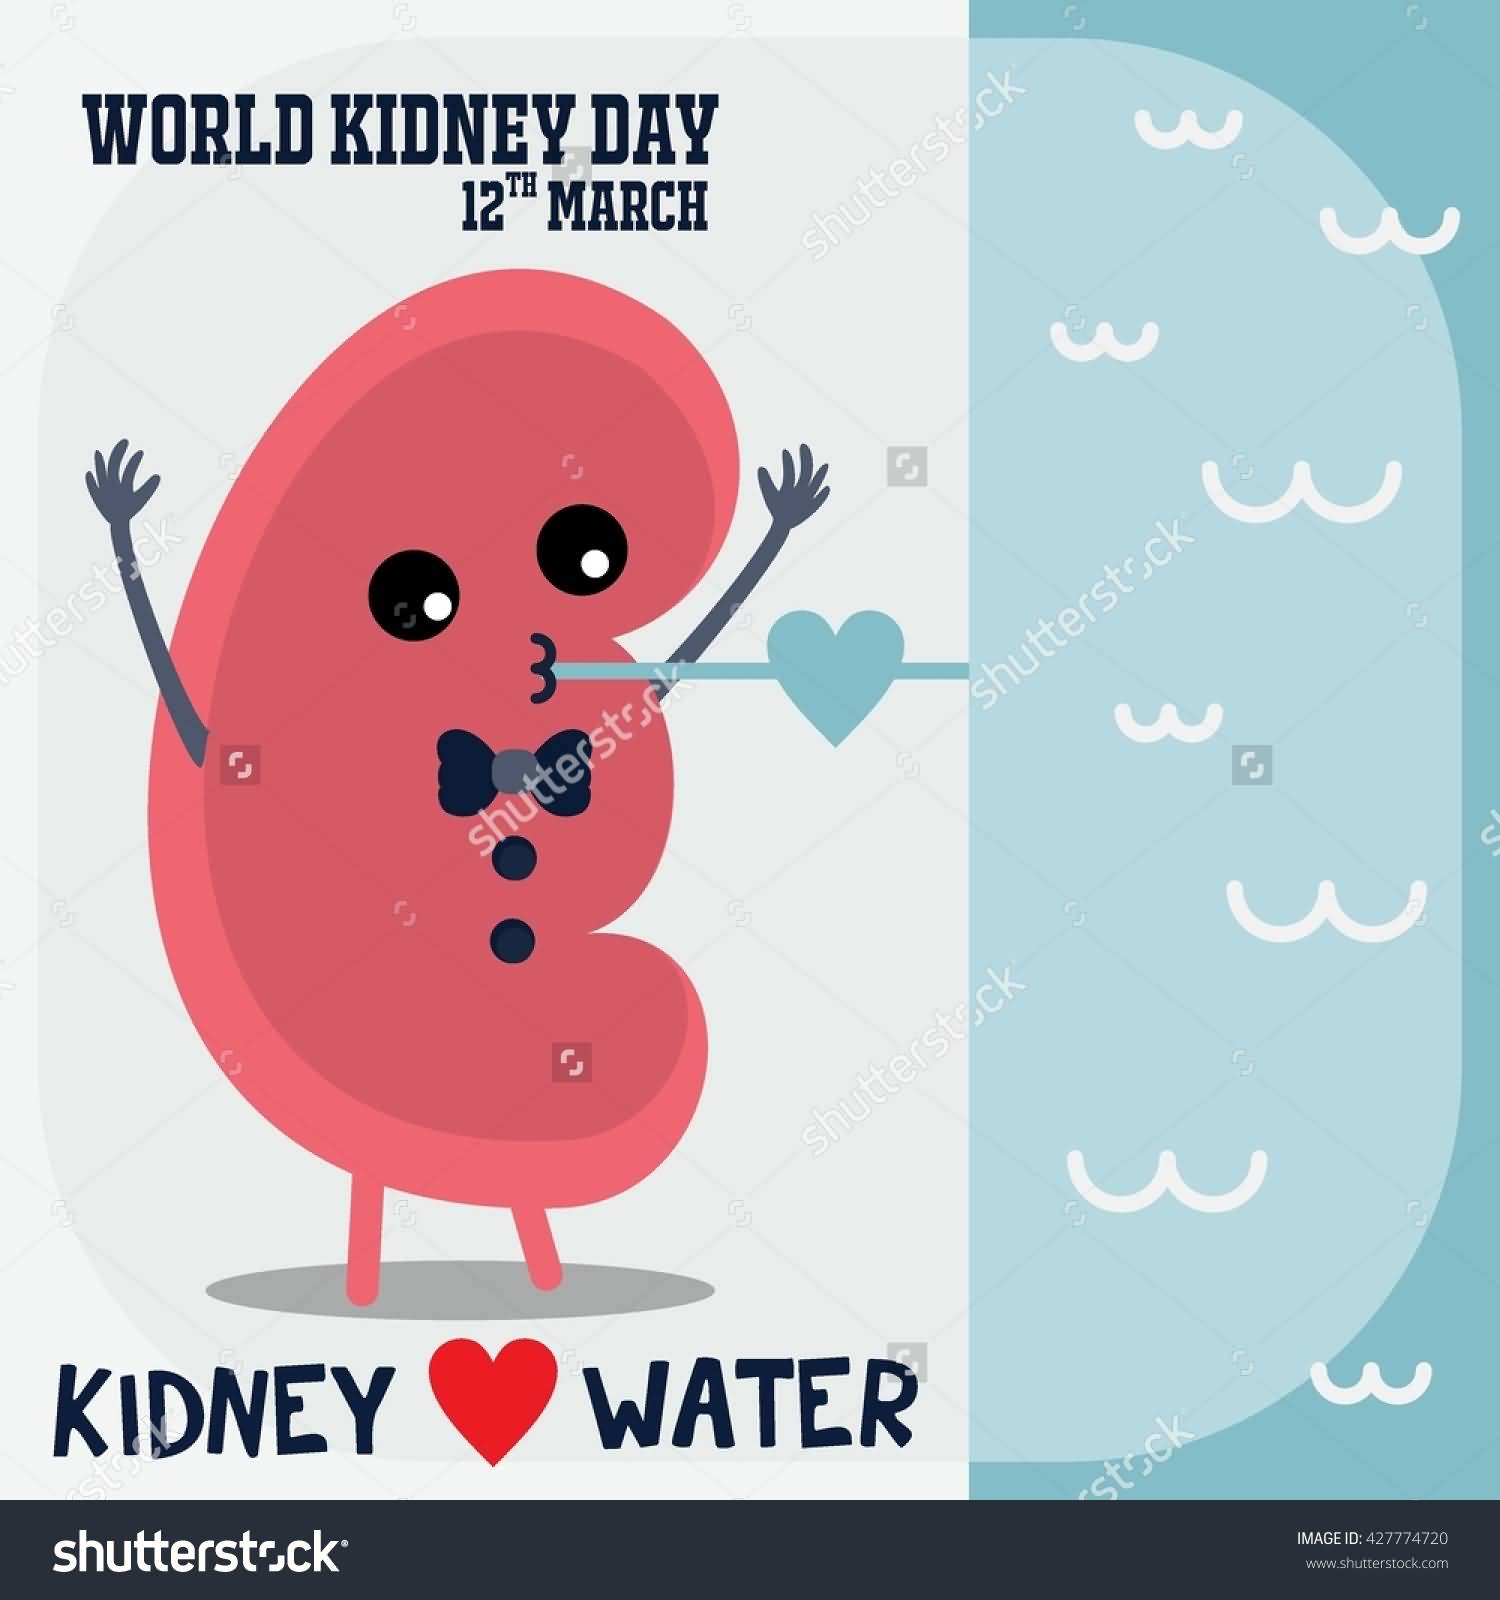 World Kidney Day 12th March Kidney Loves Water Poster